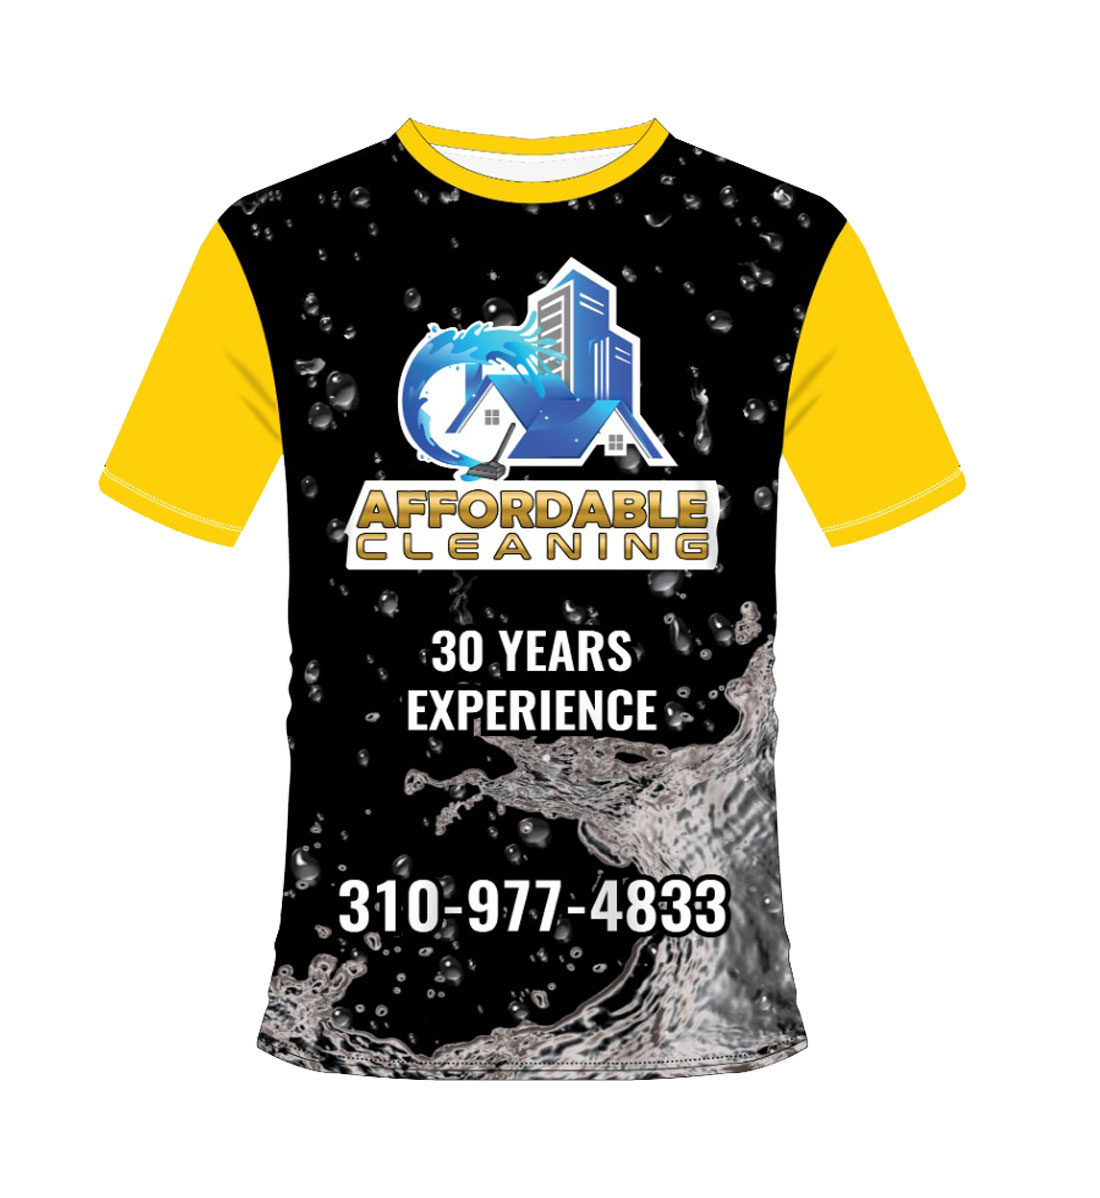 Dye Sublimation Shirt Design and Printing